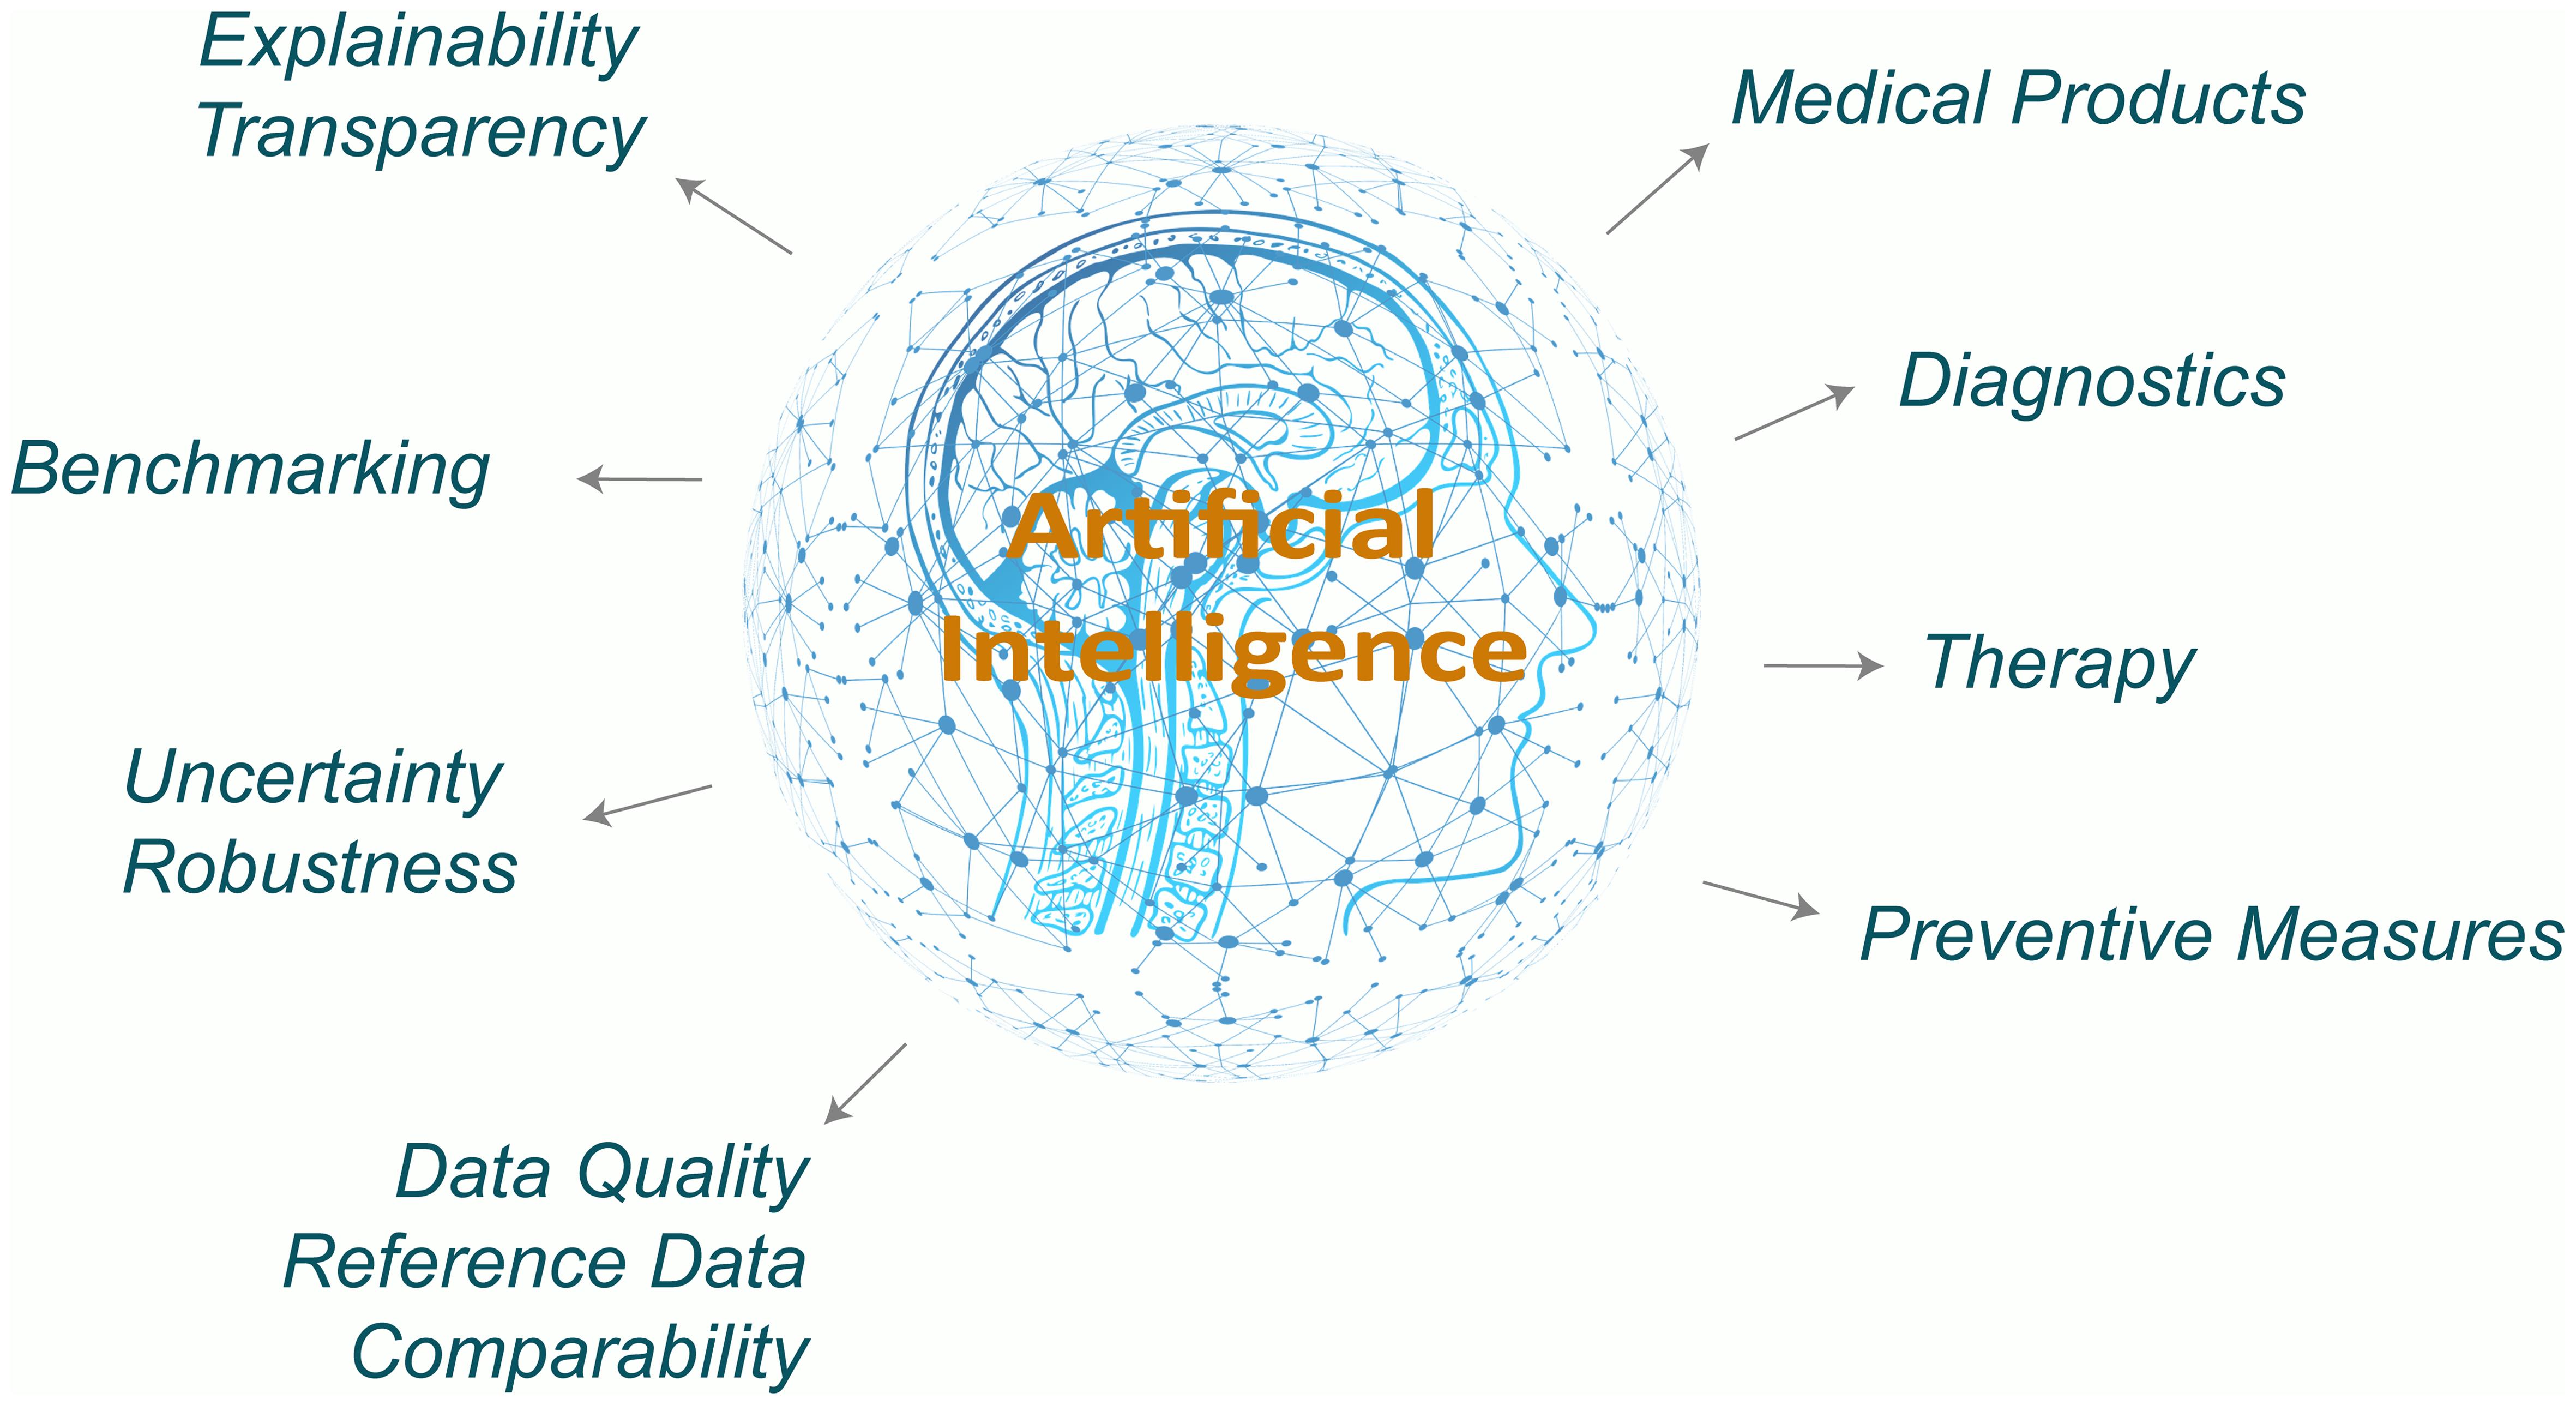 Overview of artificial intelligence applications in medicine.